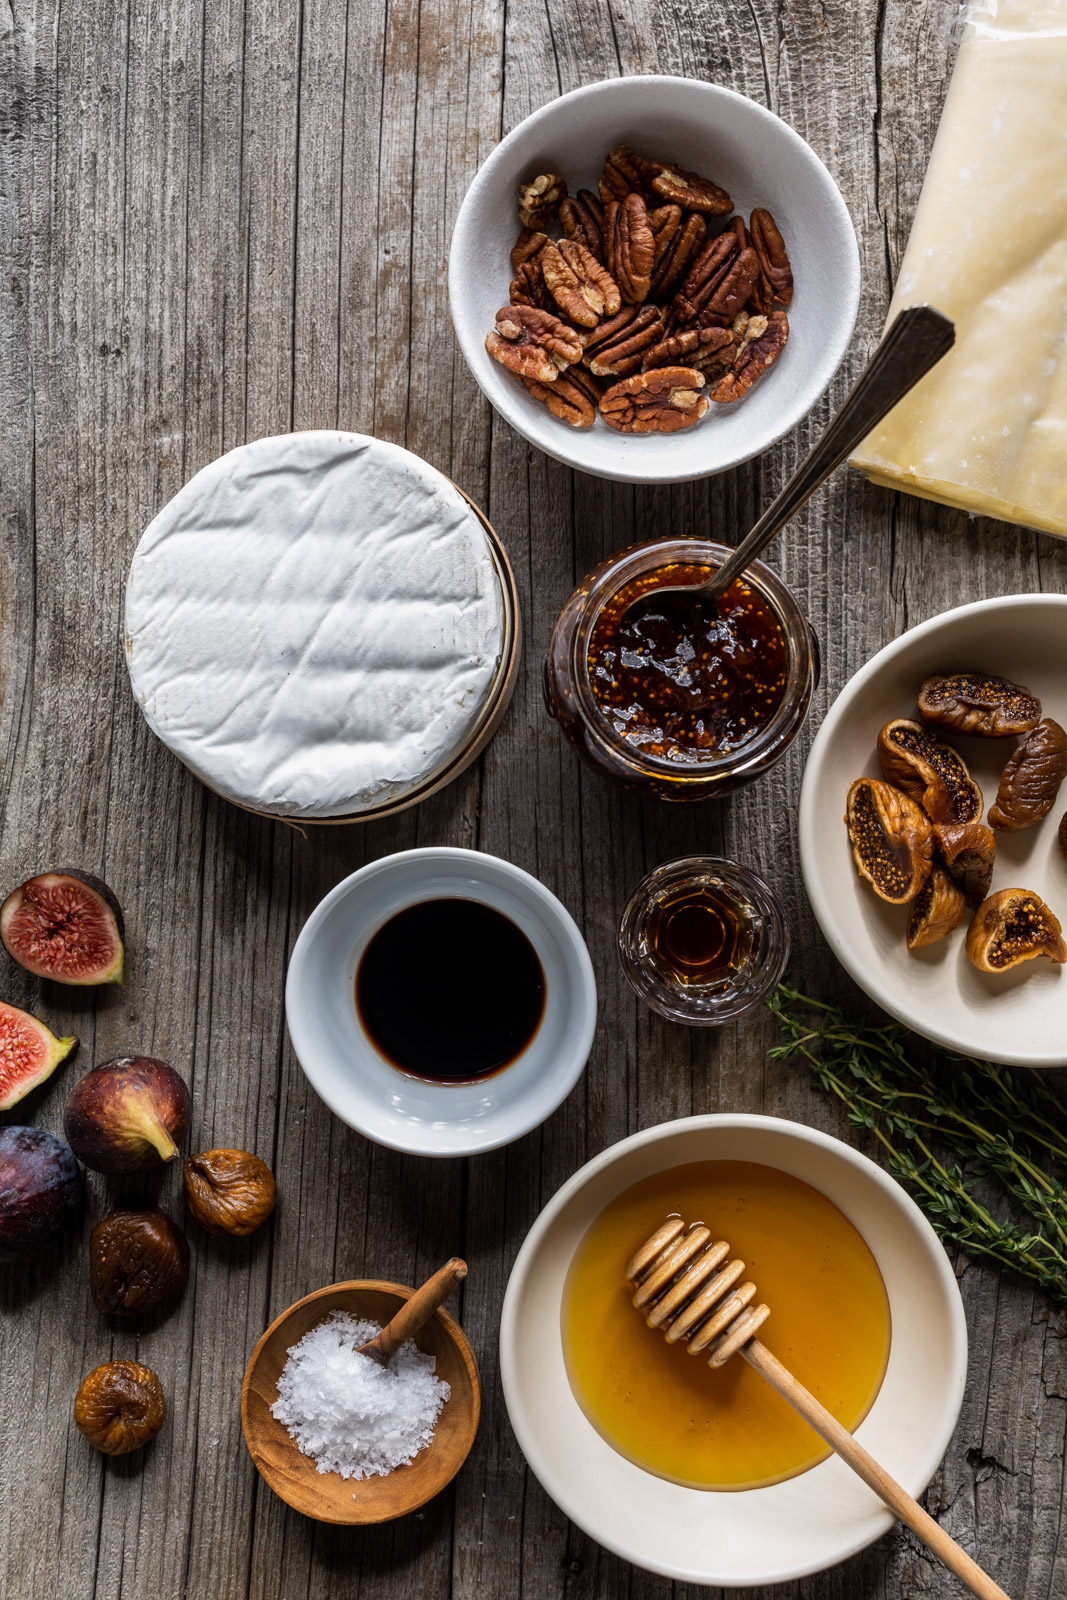 Baked Brie in Puffed Pastry With Honey Bourbon Figs